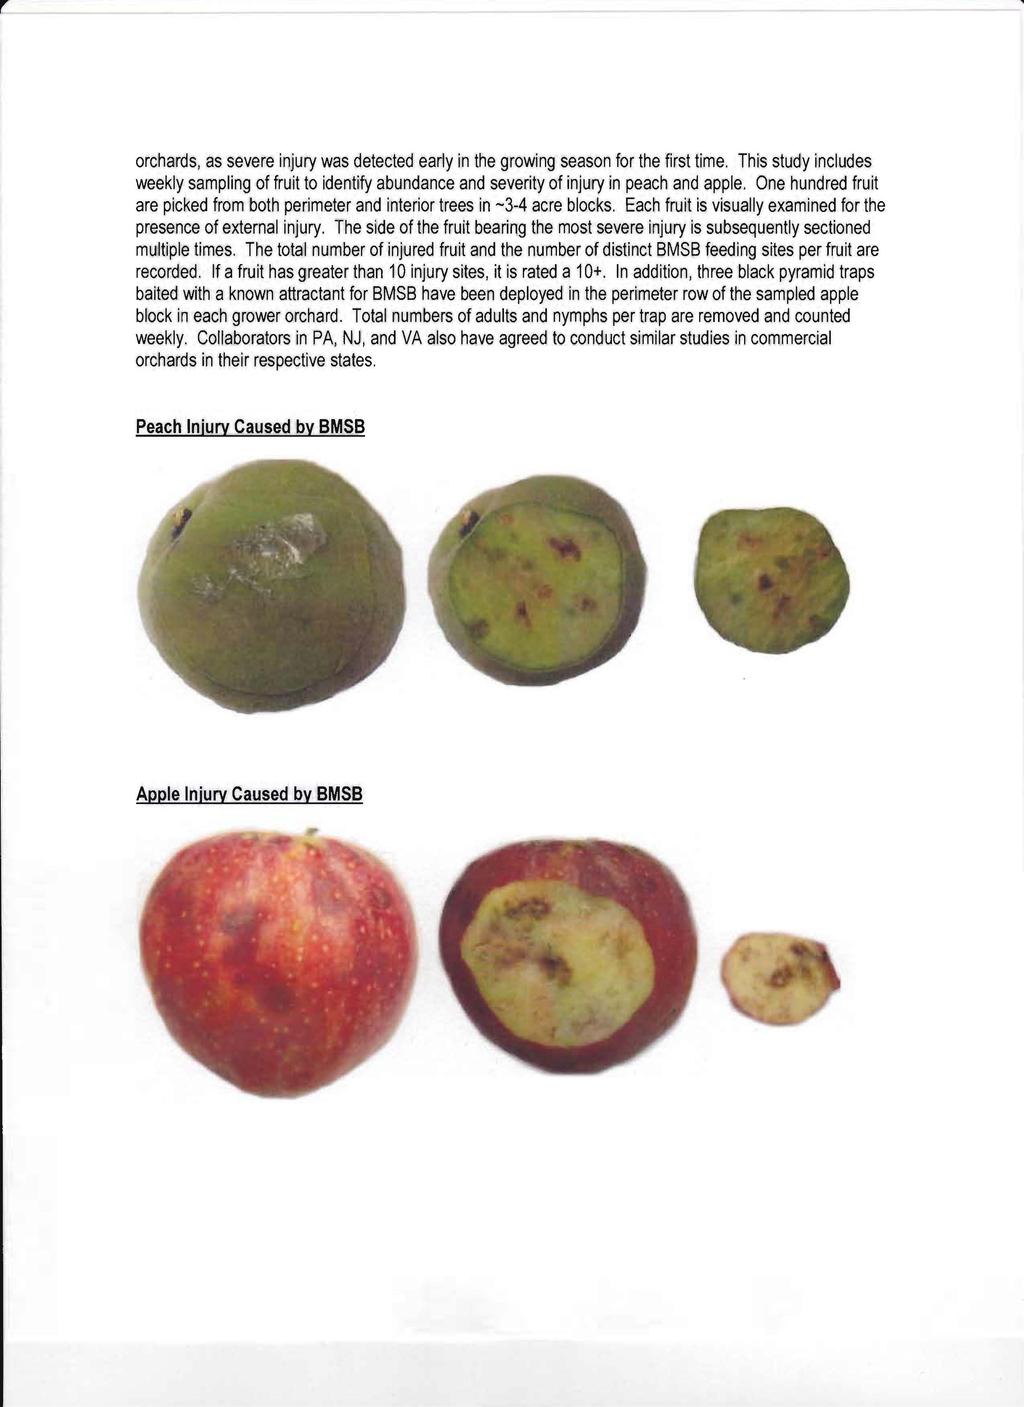 orchards, as severe injury was detected early in the growing season for the first time. This study includes weekly sampling of fruit to identify abundance and severity of injury in peach and apple.